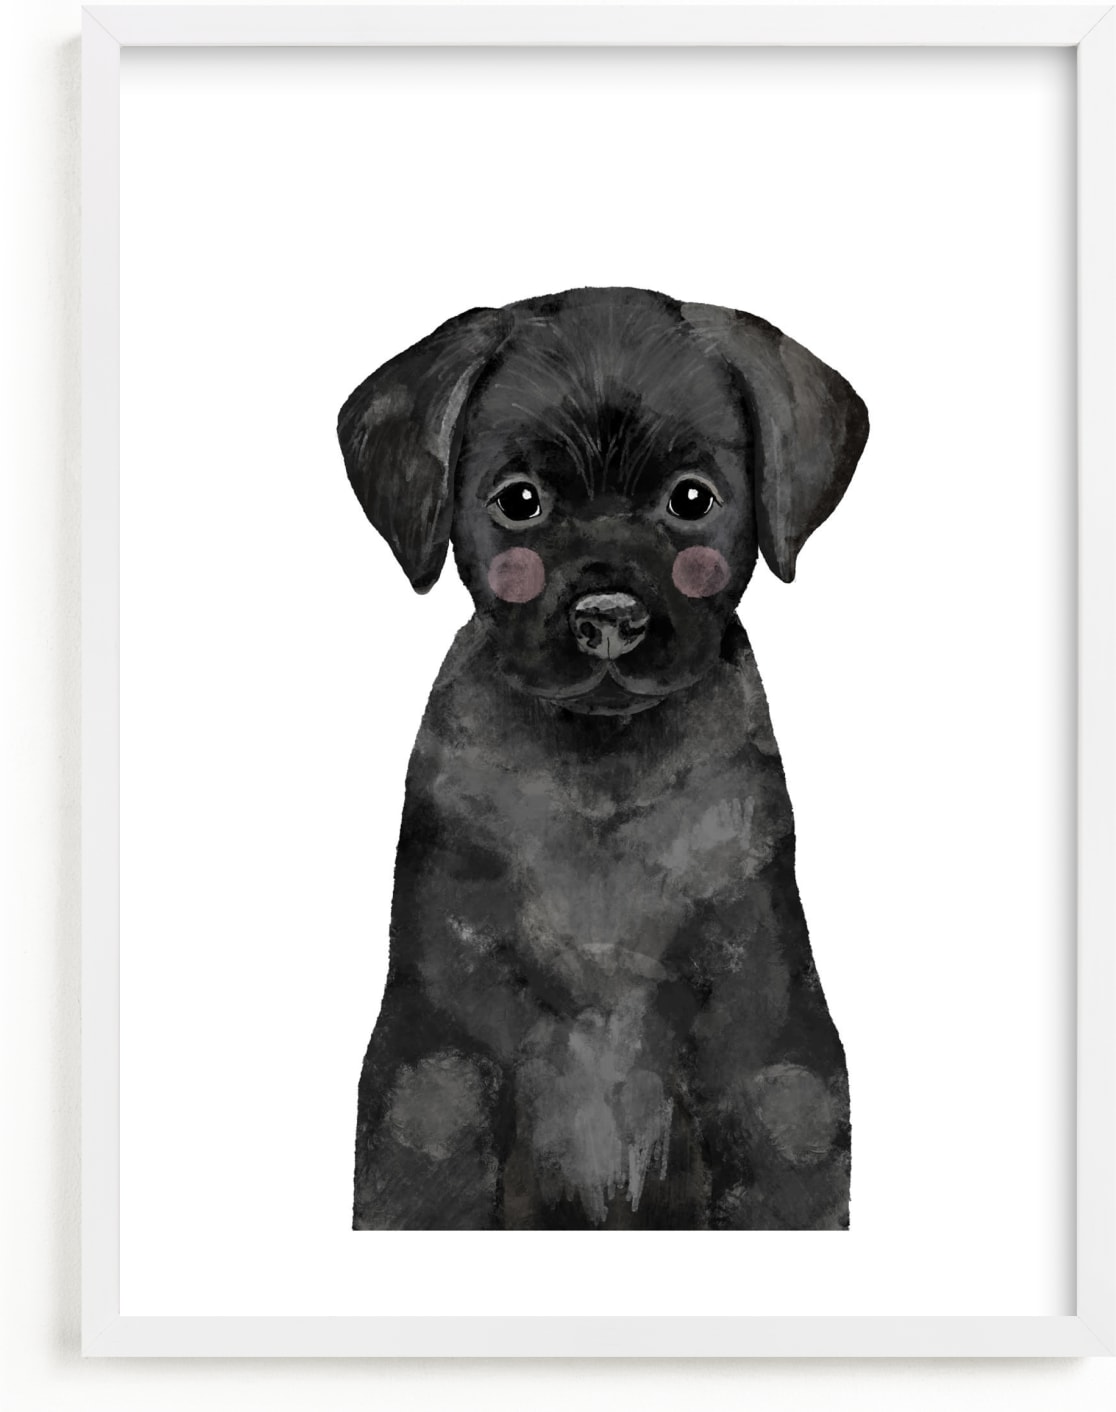 This is a black art by Cass Loh called Baby Labrador.